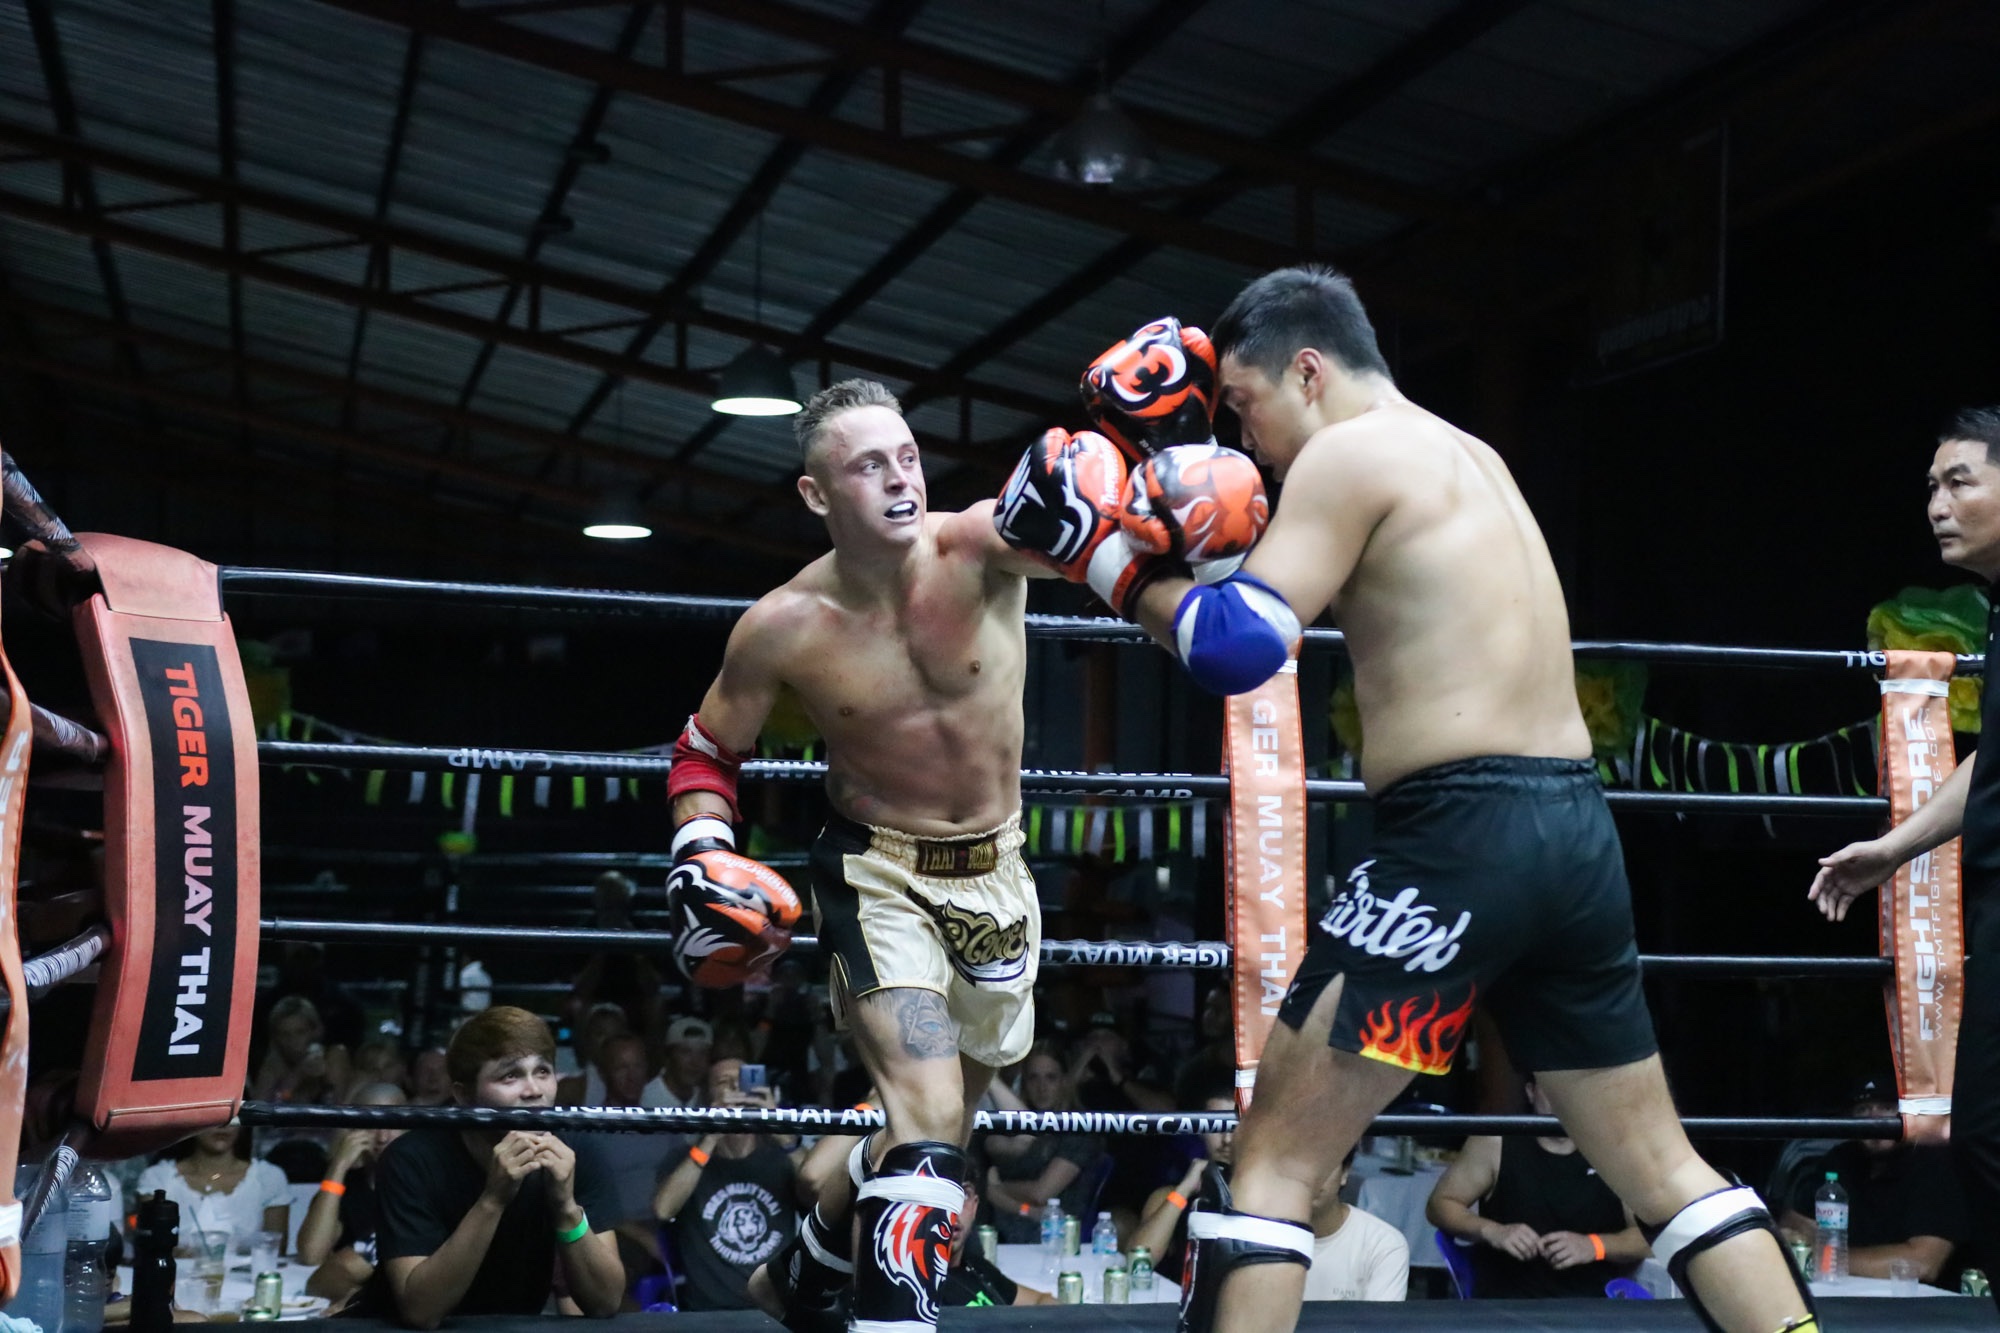 Photos from this past Saturday night’s Fights & Party at BBQ Beatdown 152